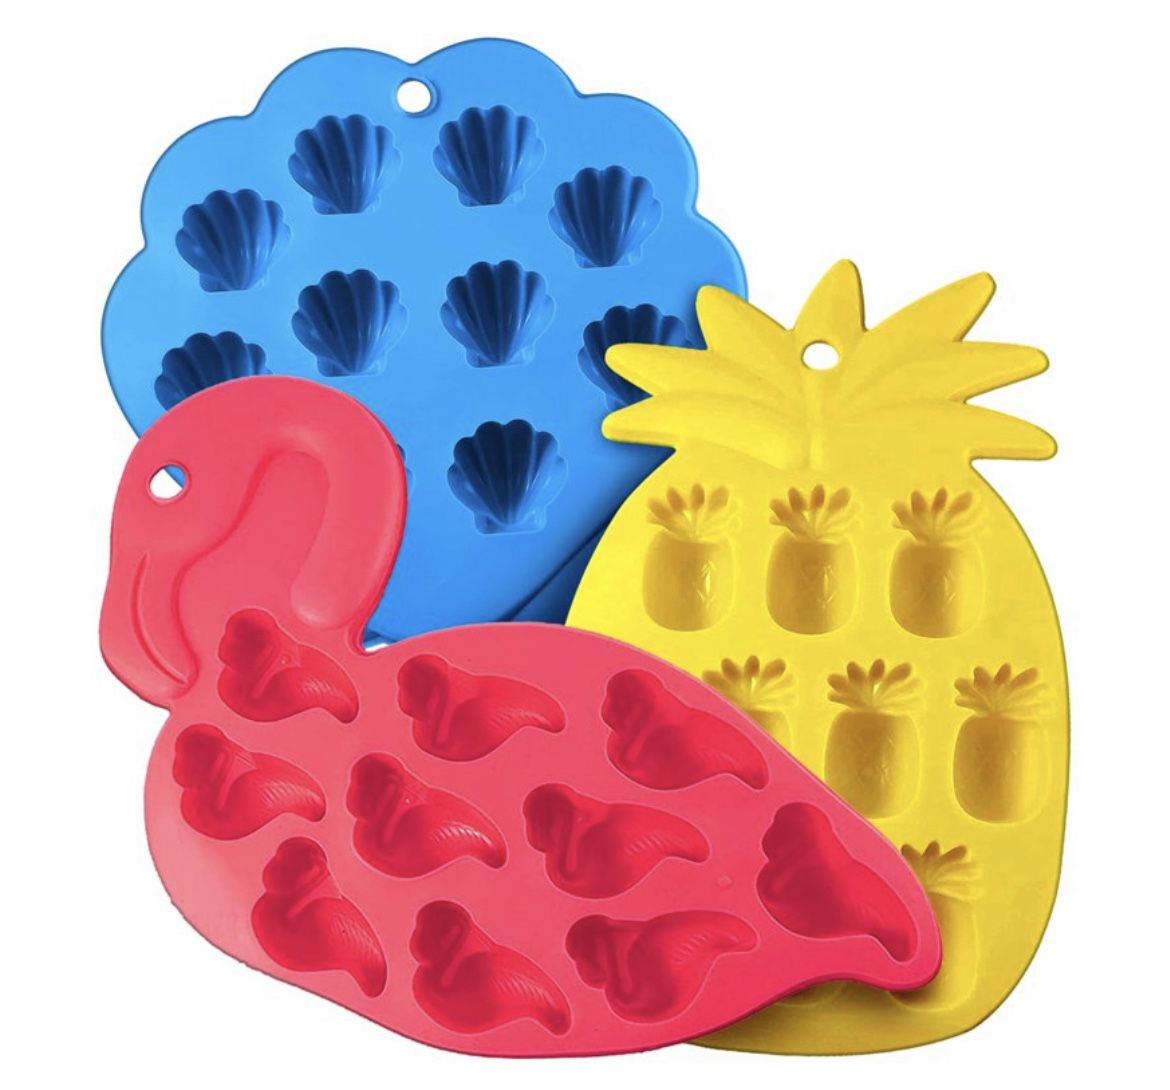 NEW Three Pack Ice Cube Tray (includes: Shell Ice Cube Tray, Pineapple Ice Cube Tray, Flamingo)